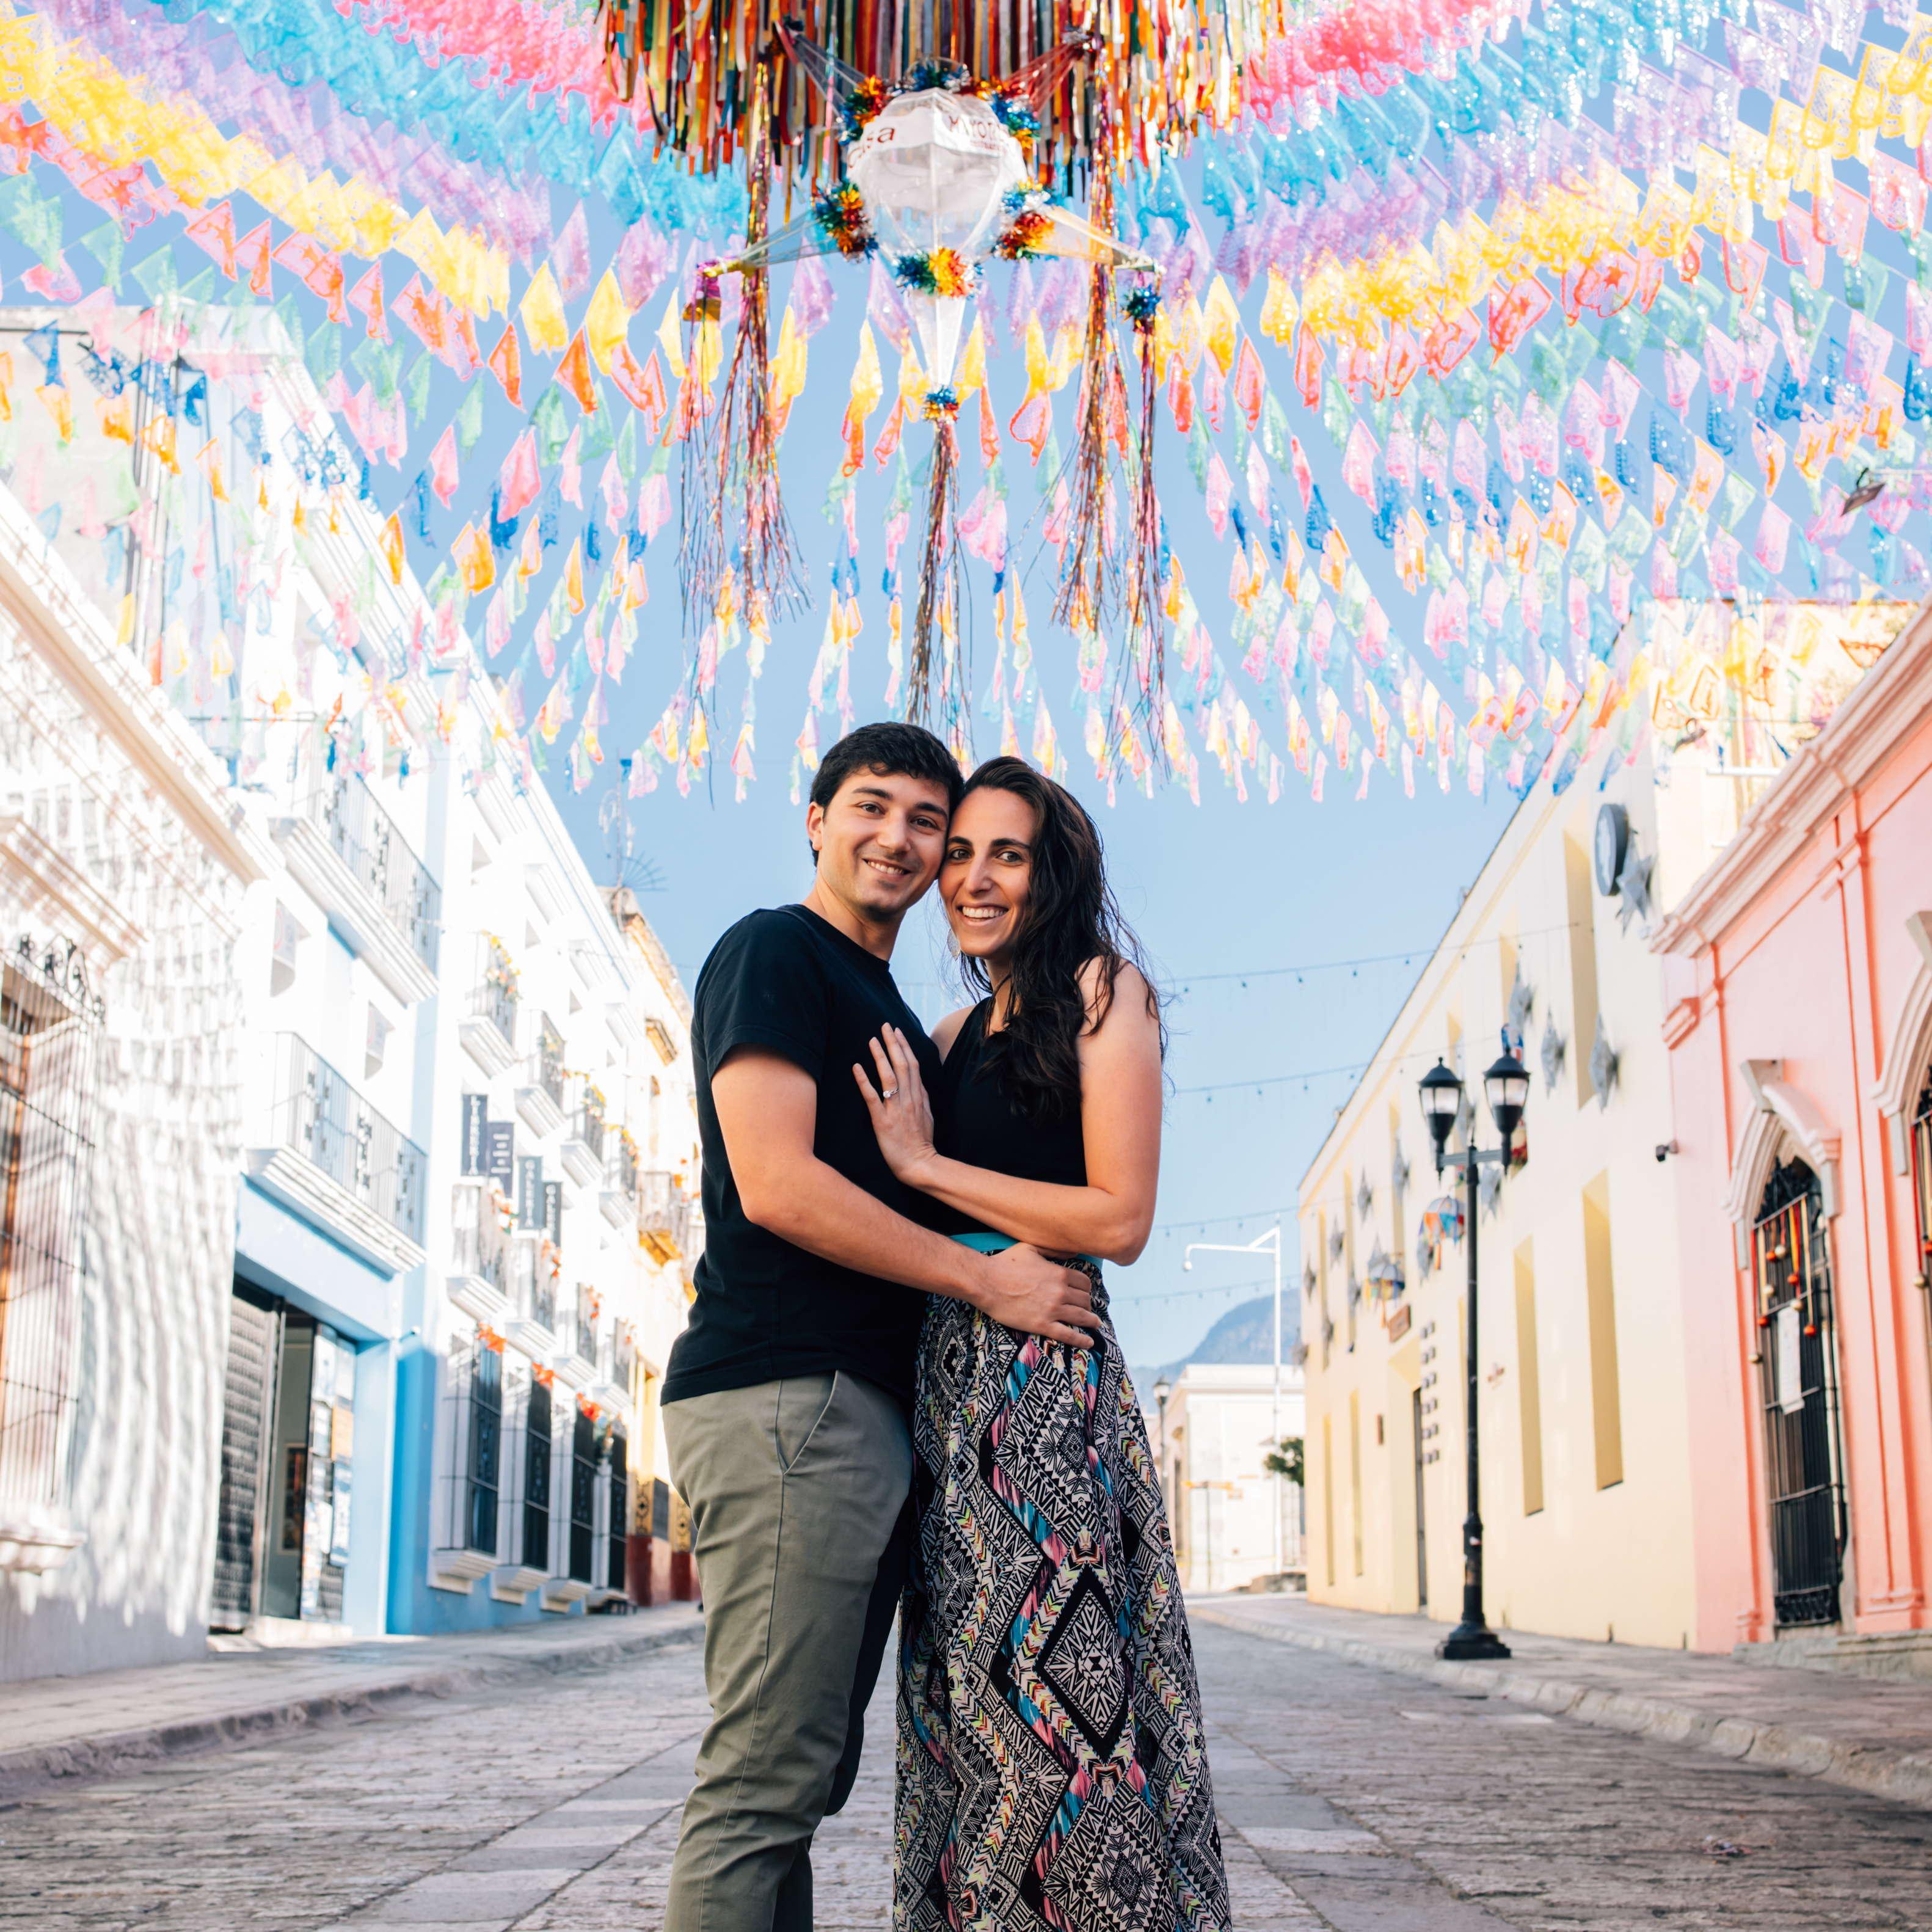 In Oaxaca - after we got engaged!